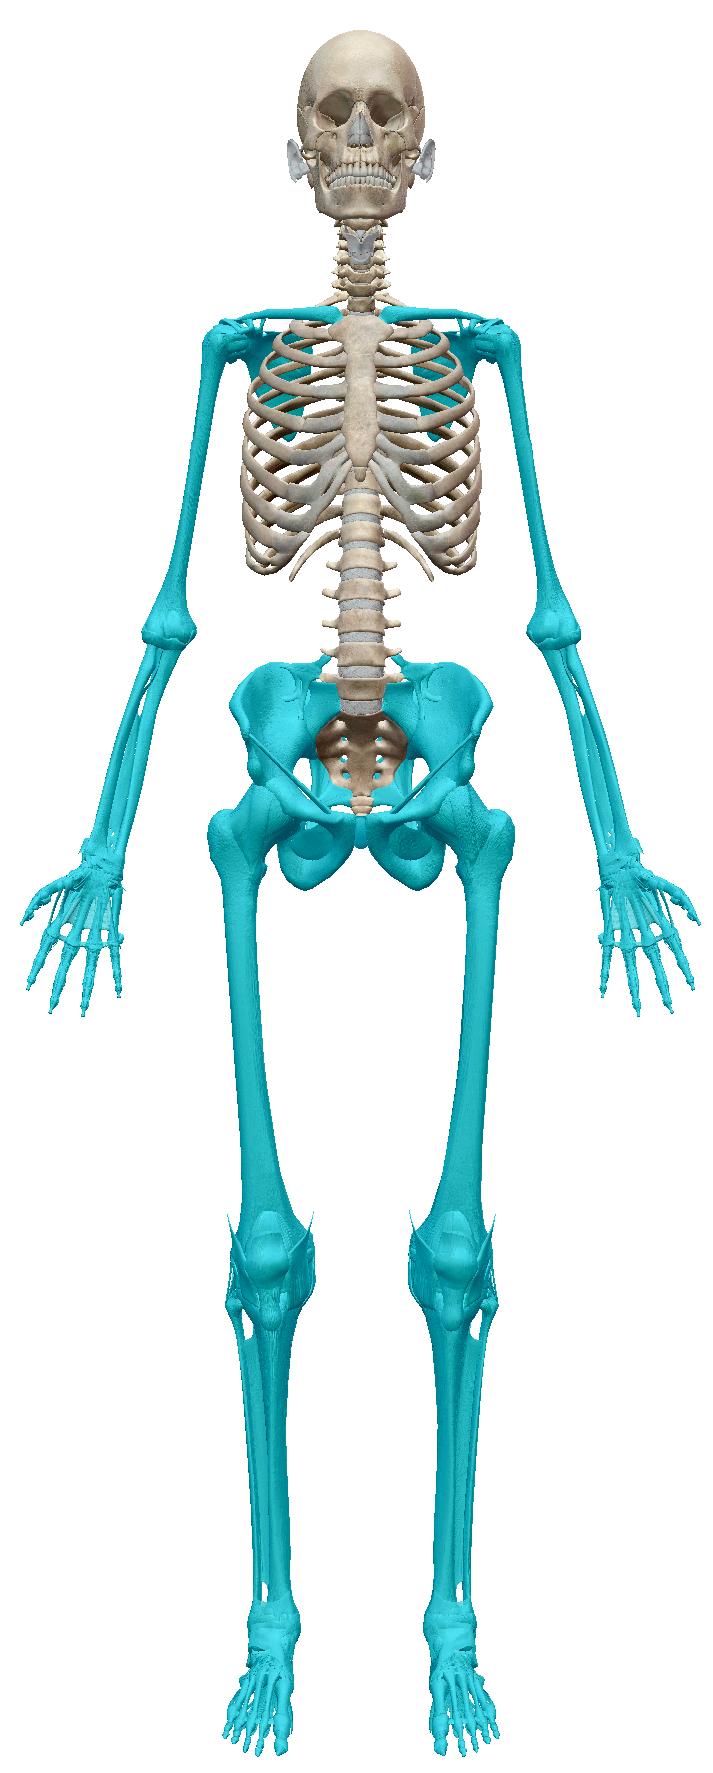 axial skeleton SKELETAL SYSTEM There are two divisions of the skeletal